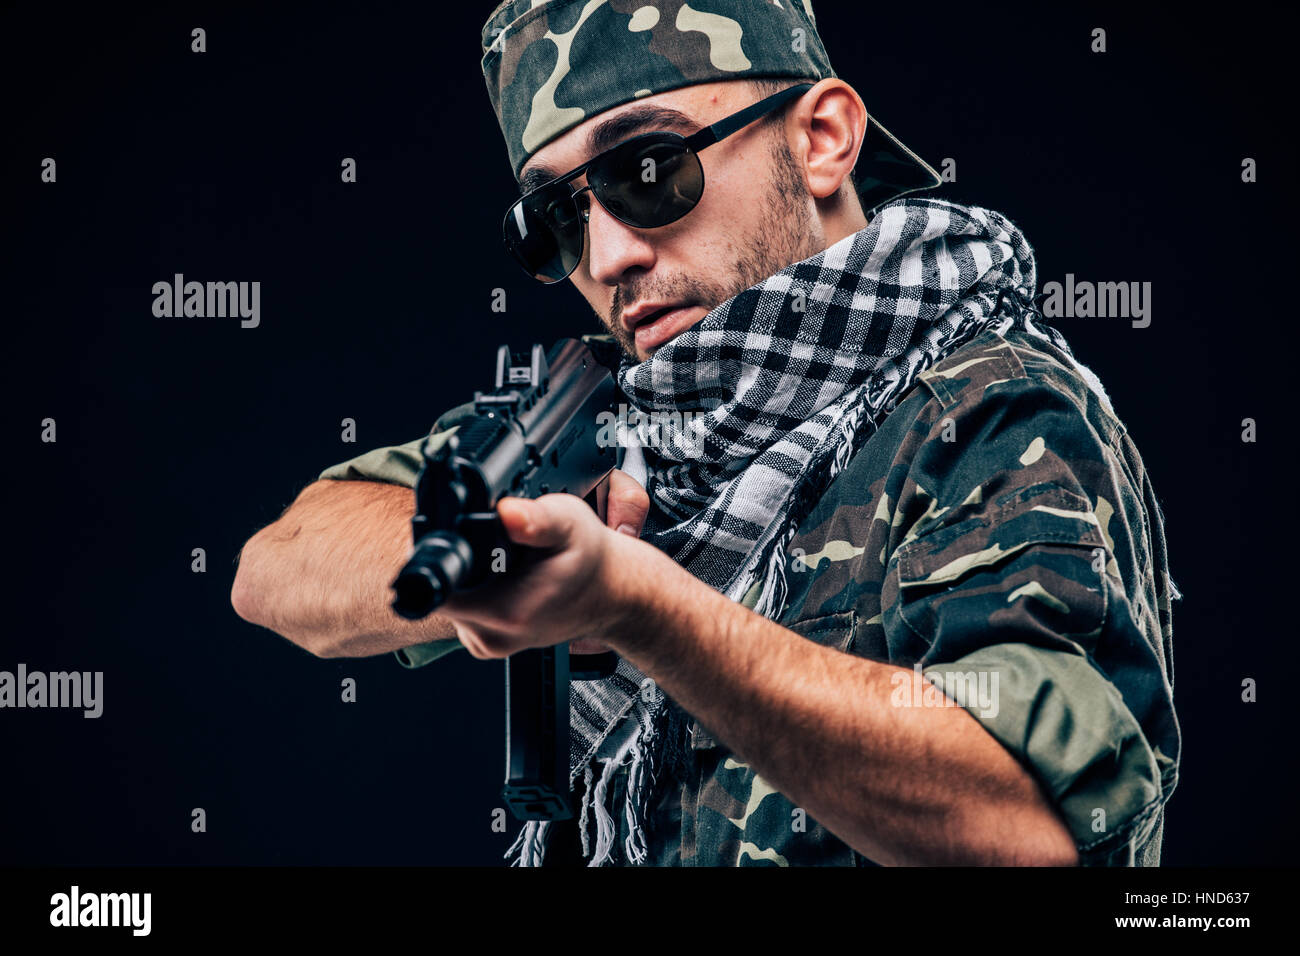 Terrorist sniper shooting with his weapon. Concept about terrorism Stock Photo